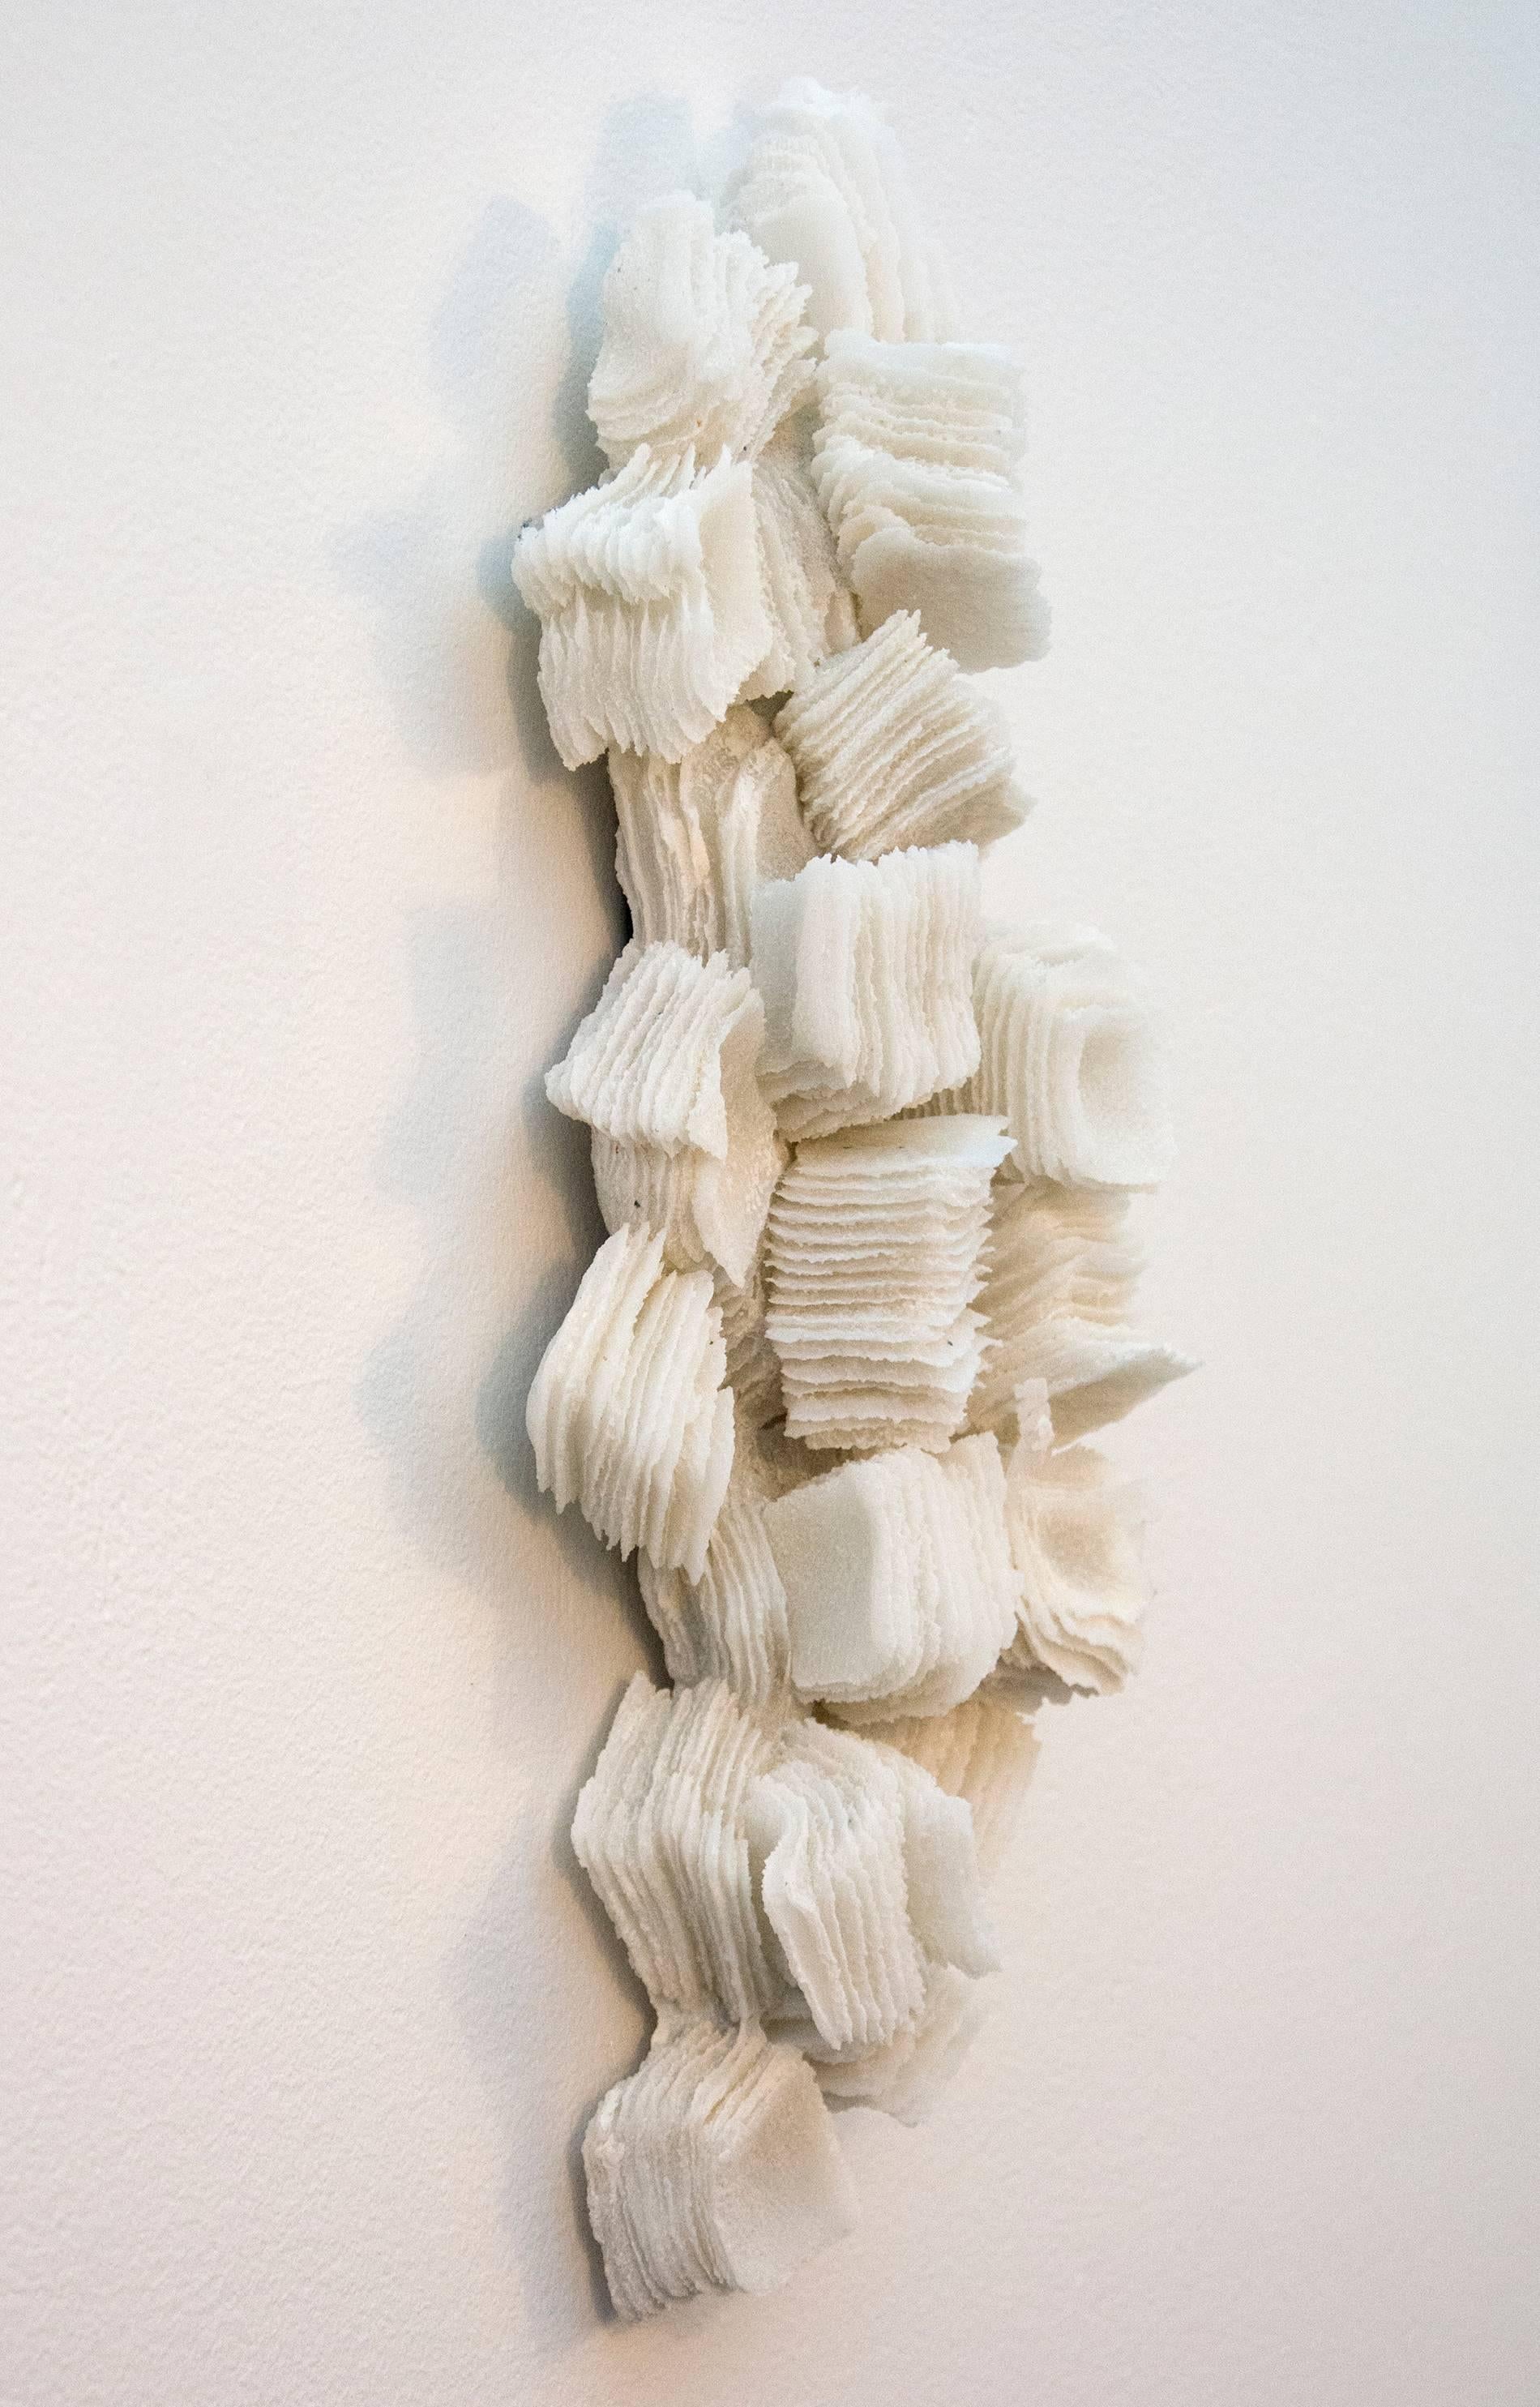 Ice Ridge No 3 - dynamic, textured, white, glass sculpted wall relief - Beige Abstract Sculpture by Cheryl Wilson Smith